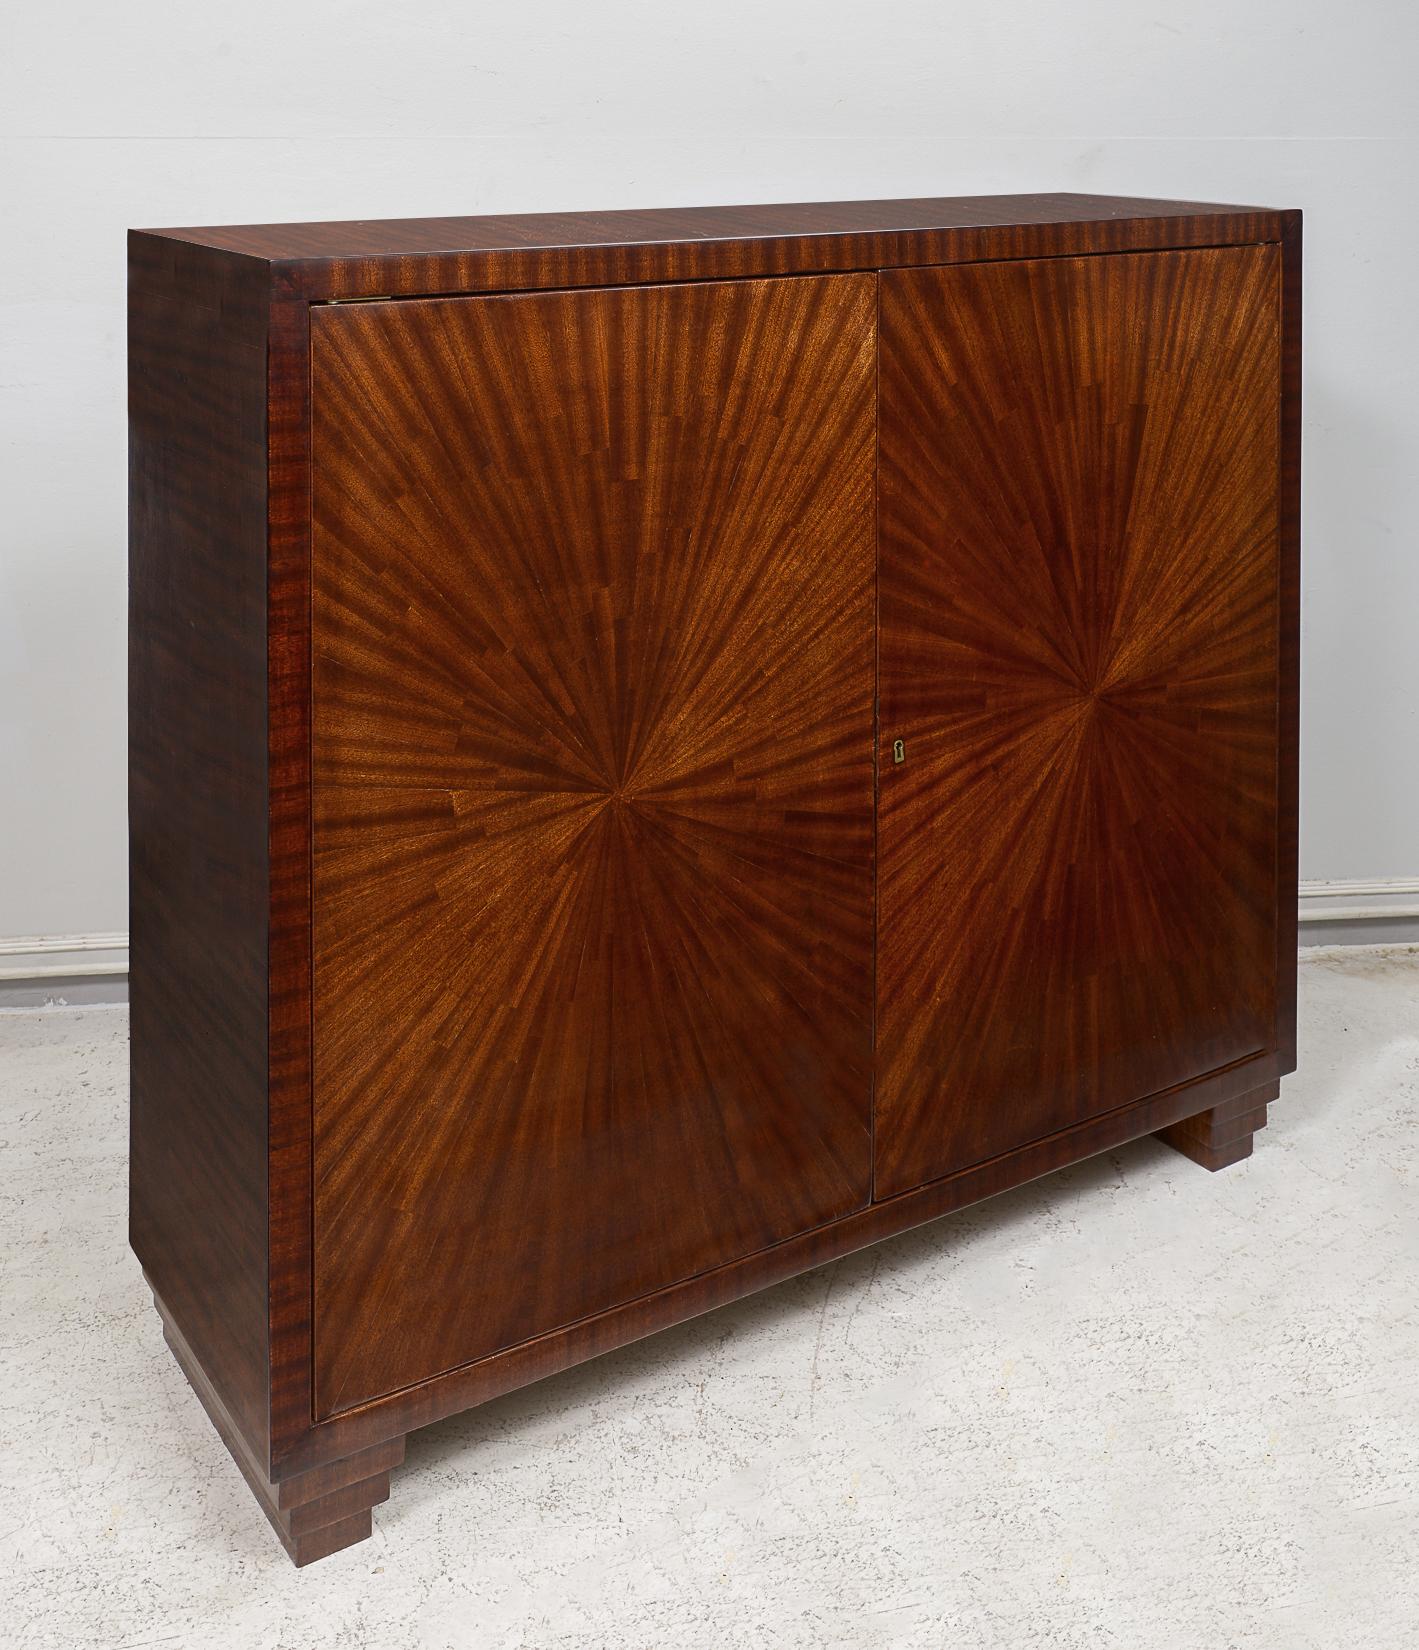 Exquisite Parquetry Cabinet with Starburst Pattern Inspired by Jean-Michel Frank